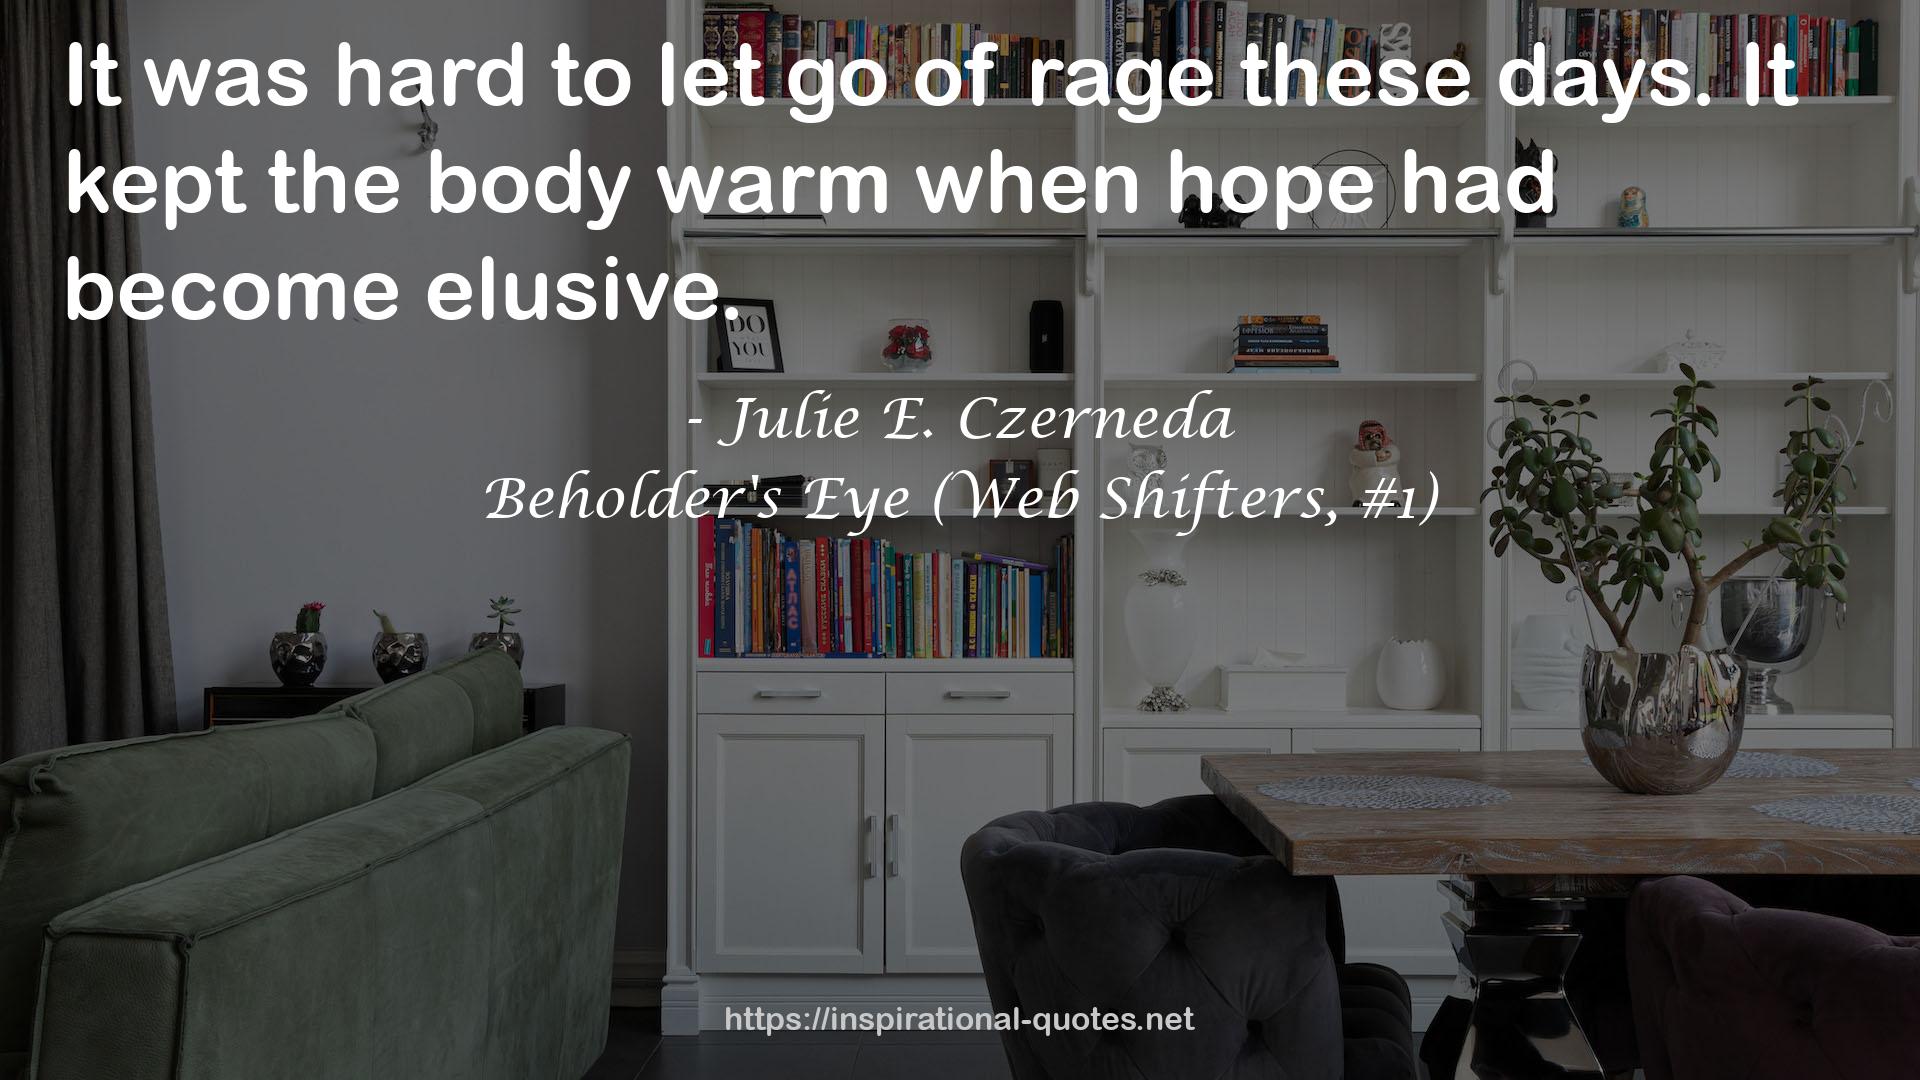 Beholder's Eye (Web Shifters, #1) QUOTES